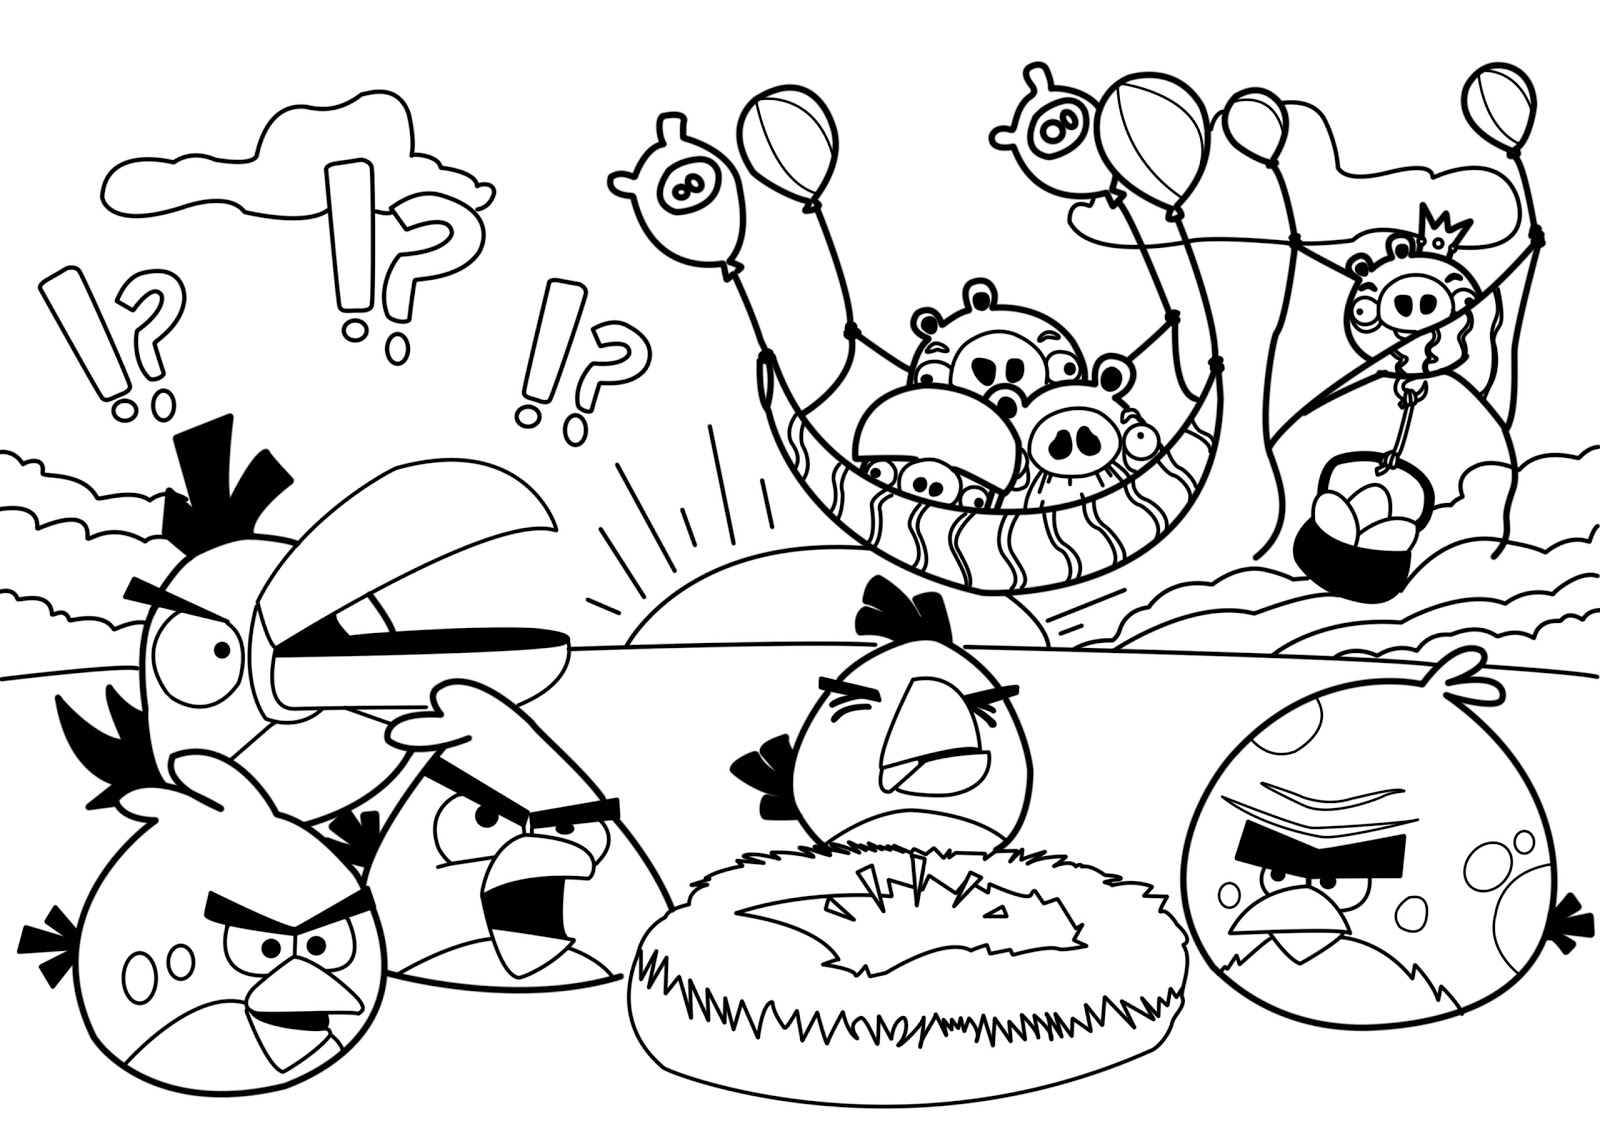 Download New Angry Birds Coloring Pages | All Free Coloring Page ...